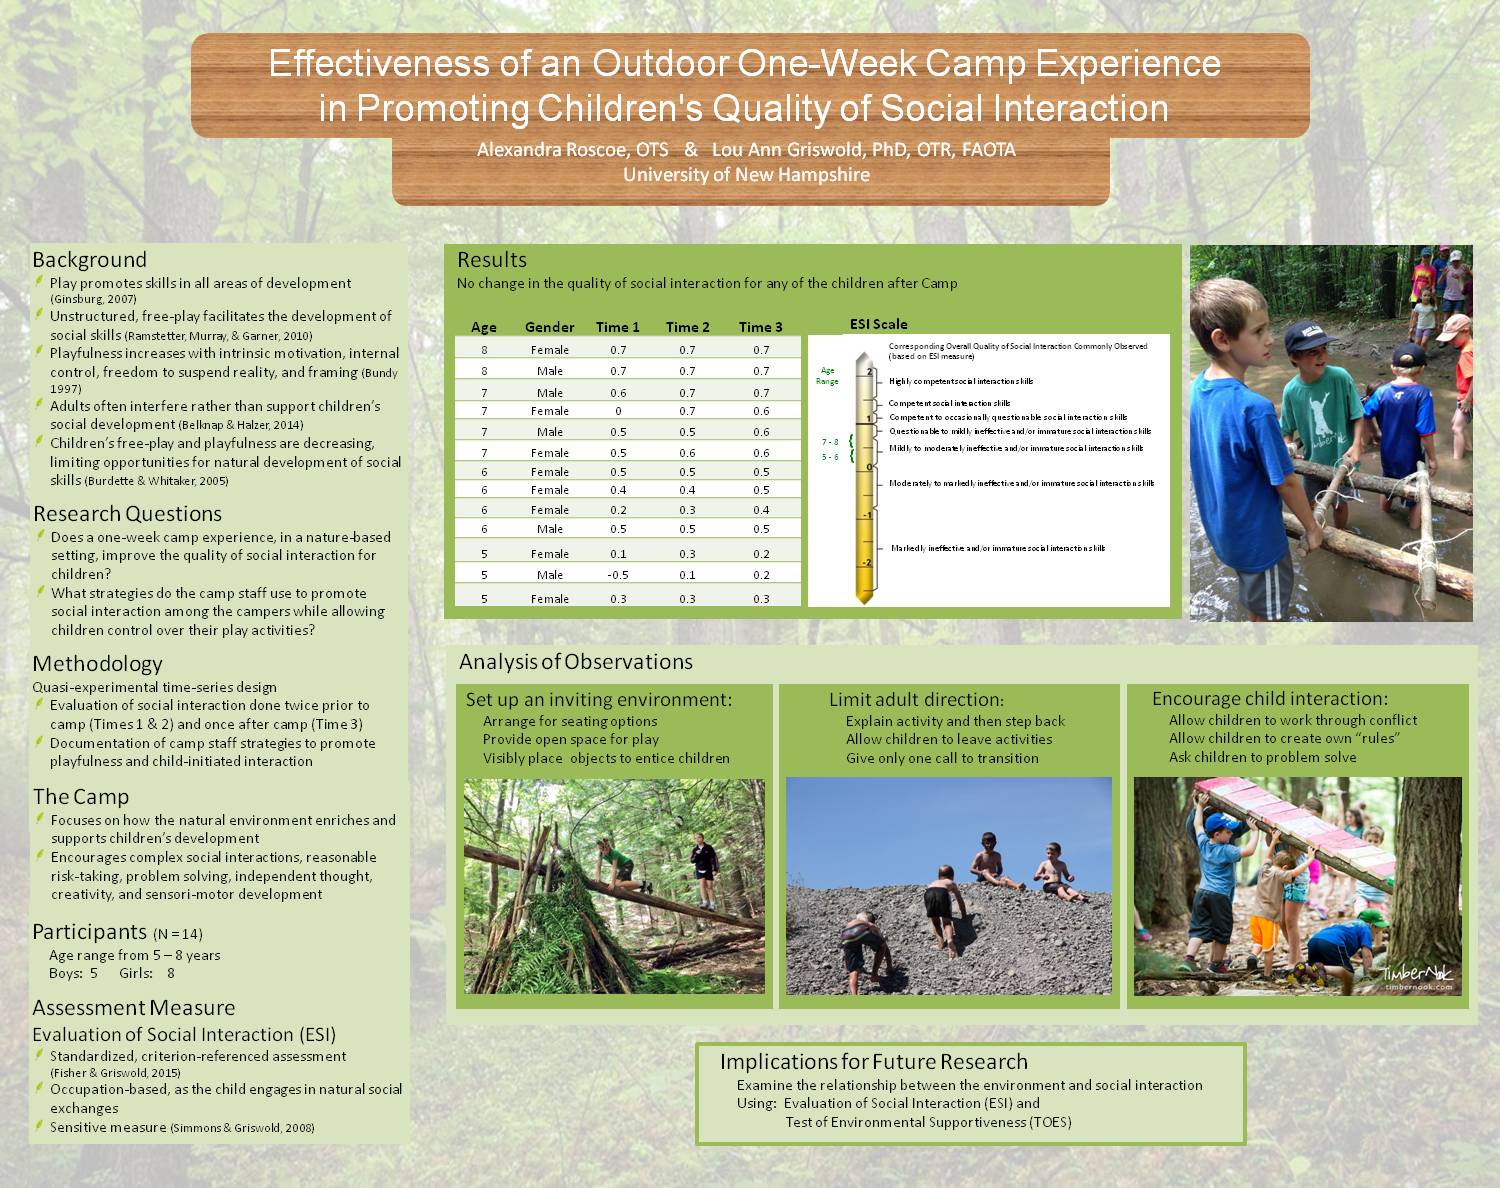 Effectiveness Of An Outdoor One-Week Camp Experience  In Promoting Children's Quality Of Social Interaction by loug